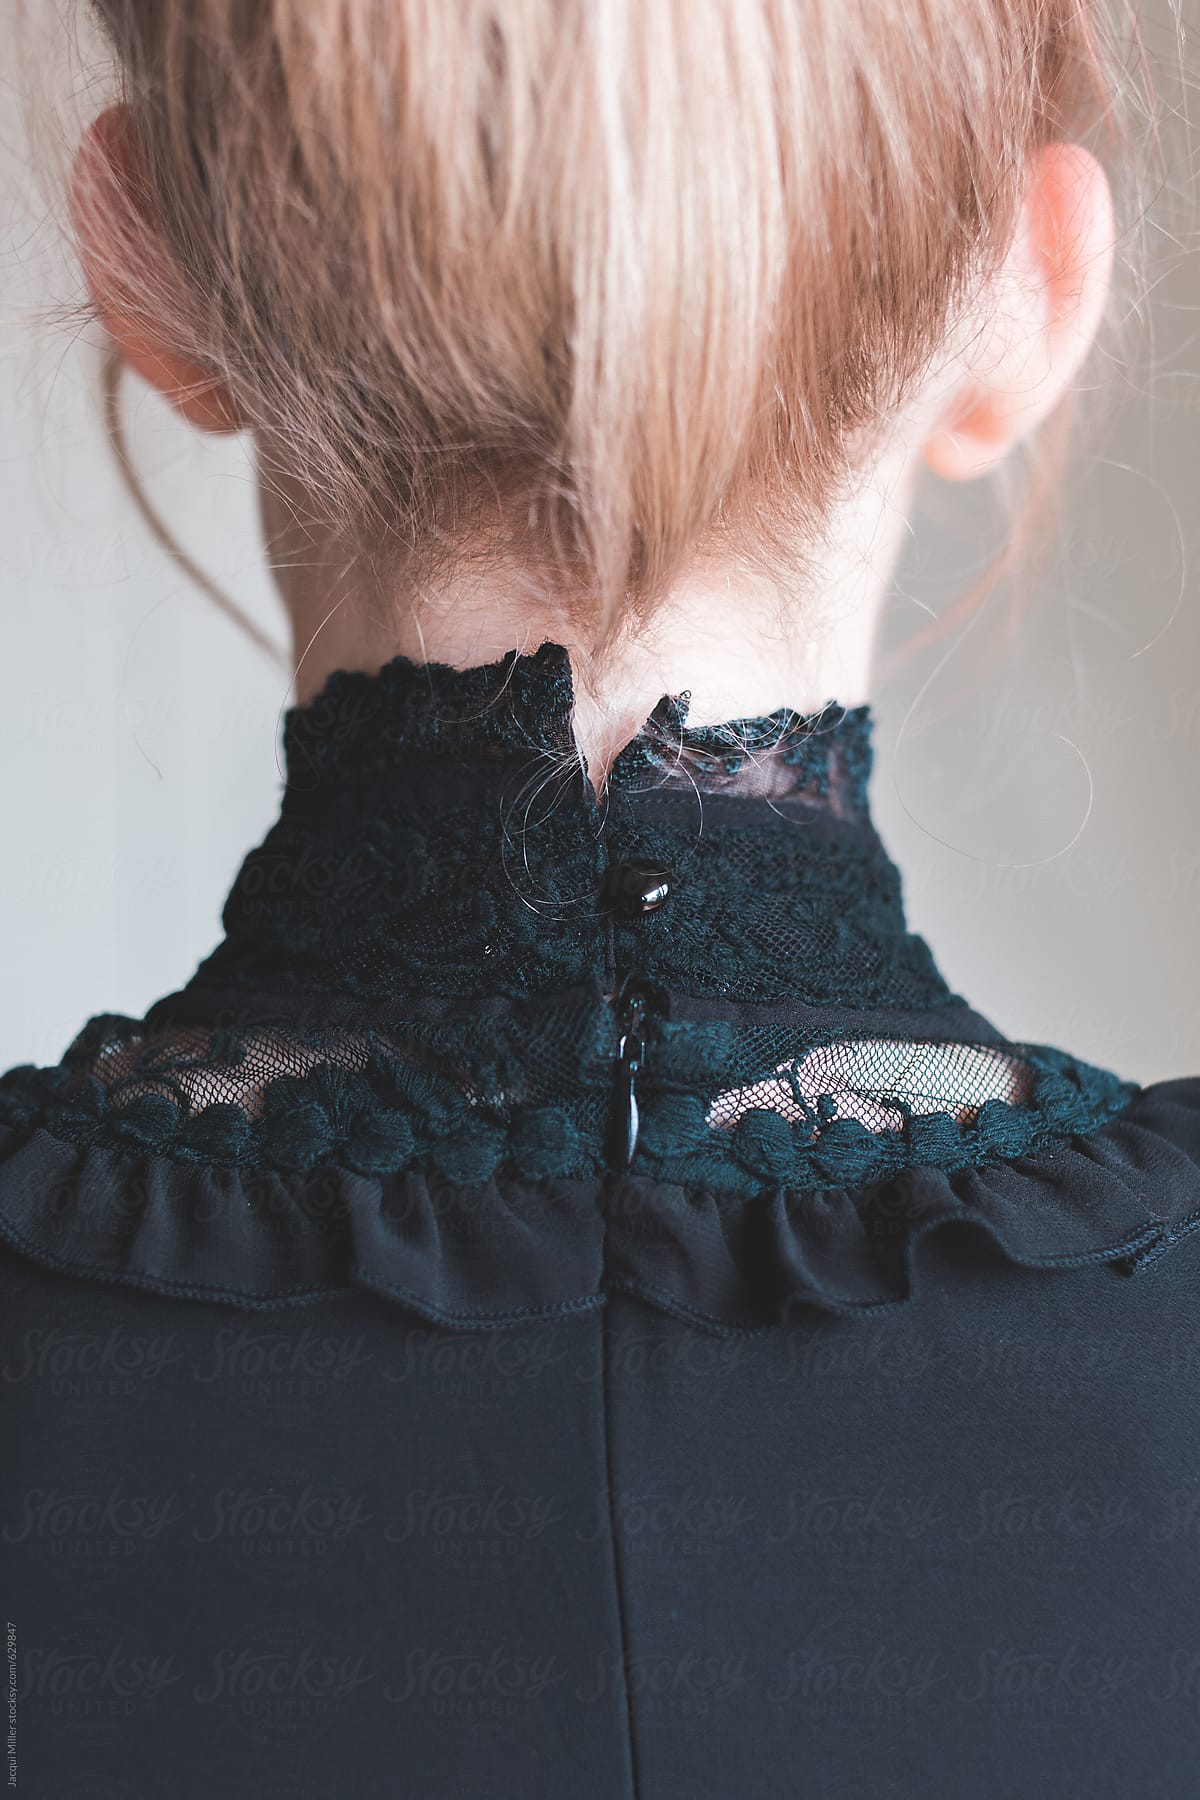 Back view of girl with blonde hair wearing a high collared black lace shirt